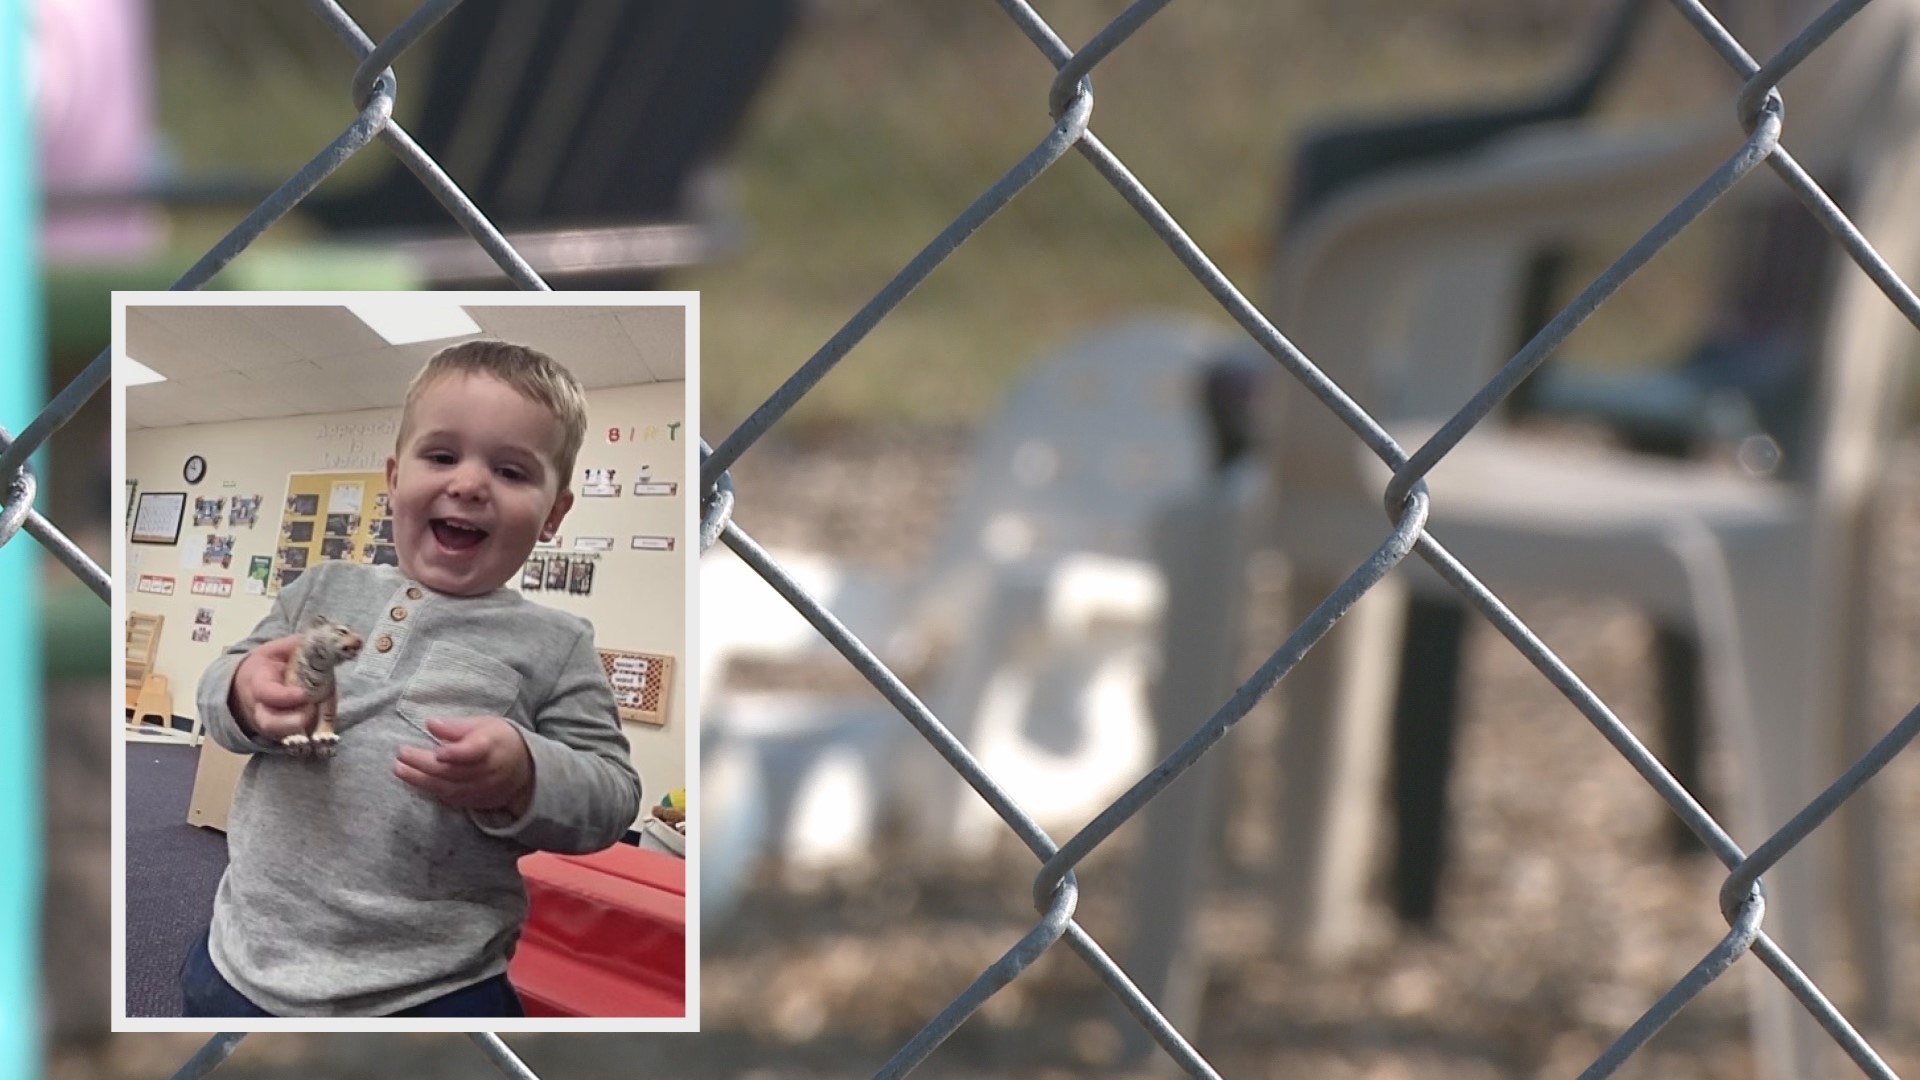 Two days after news came out than an 18-month-old had been left alone outside Horizon Little Explorers daycare, another family has reached out.